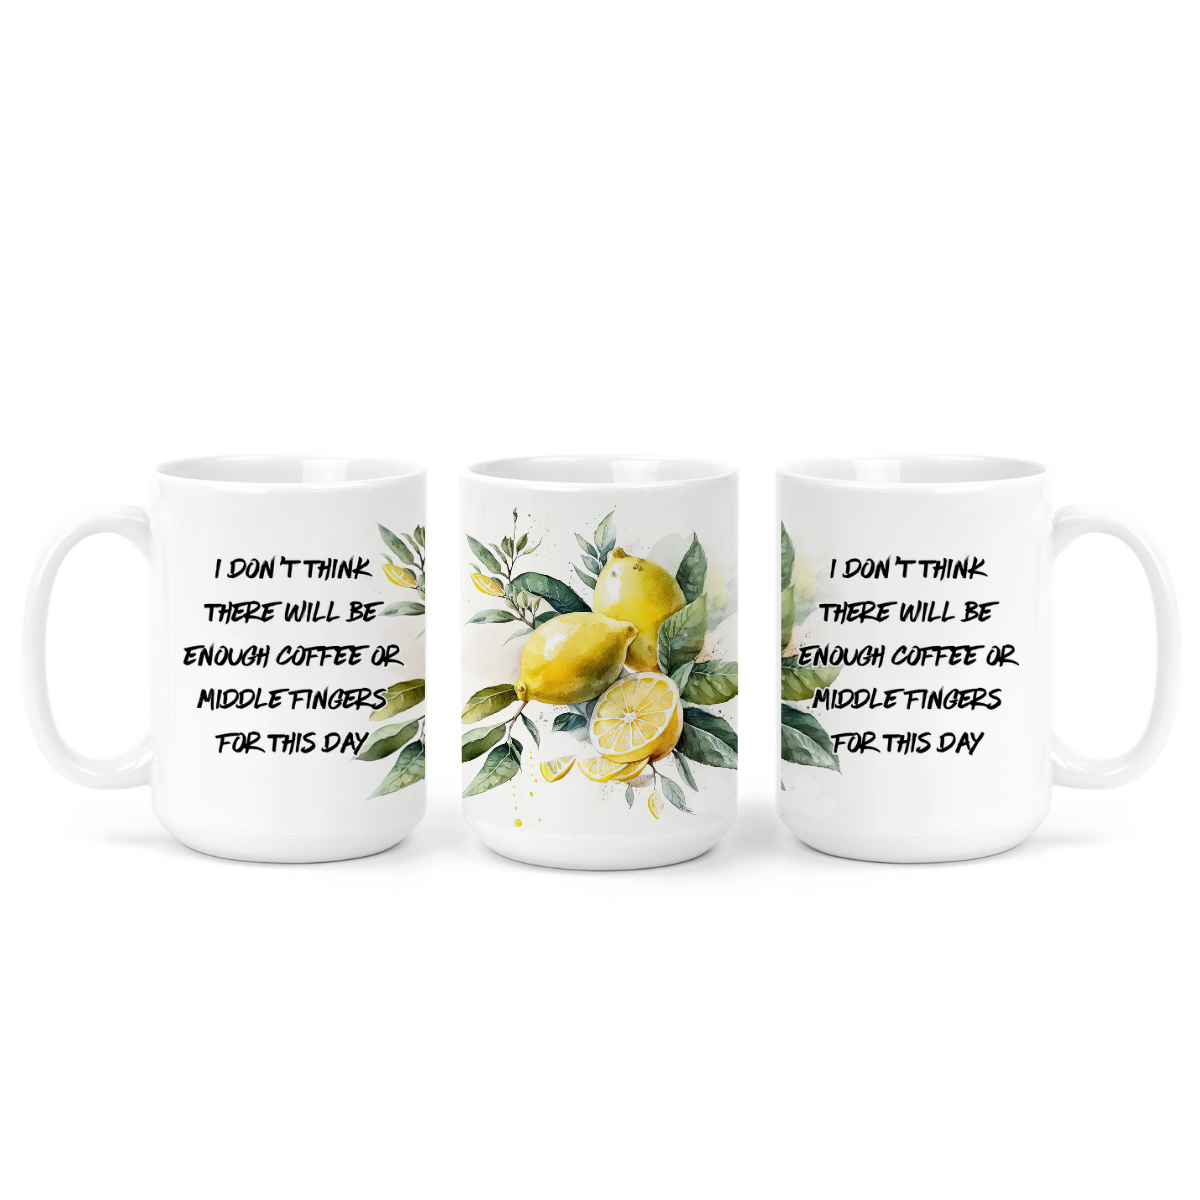 I Don't Think There Will Be Enough Coffee | Mug - The Pretty Things.ca